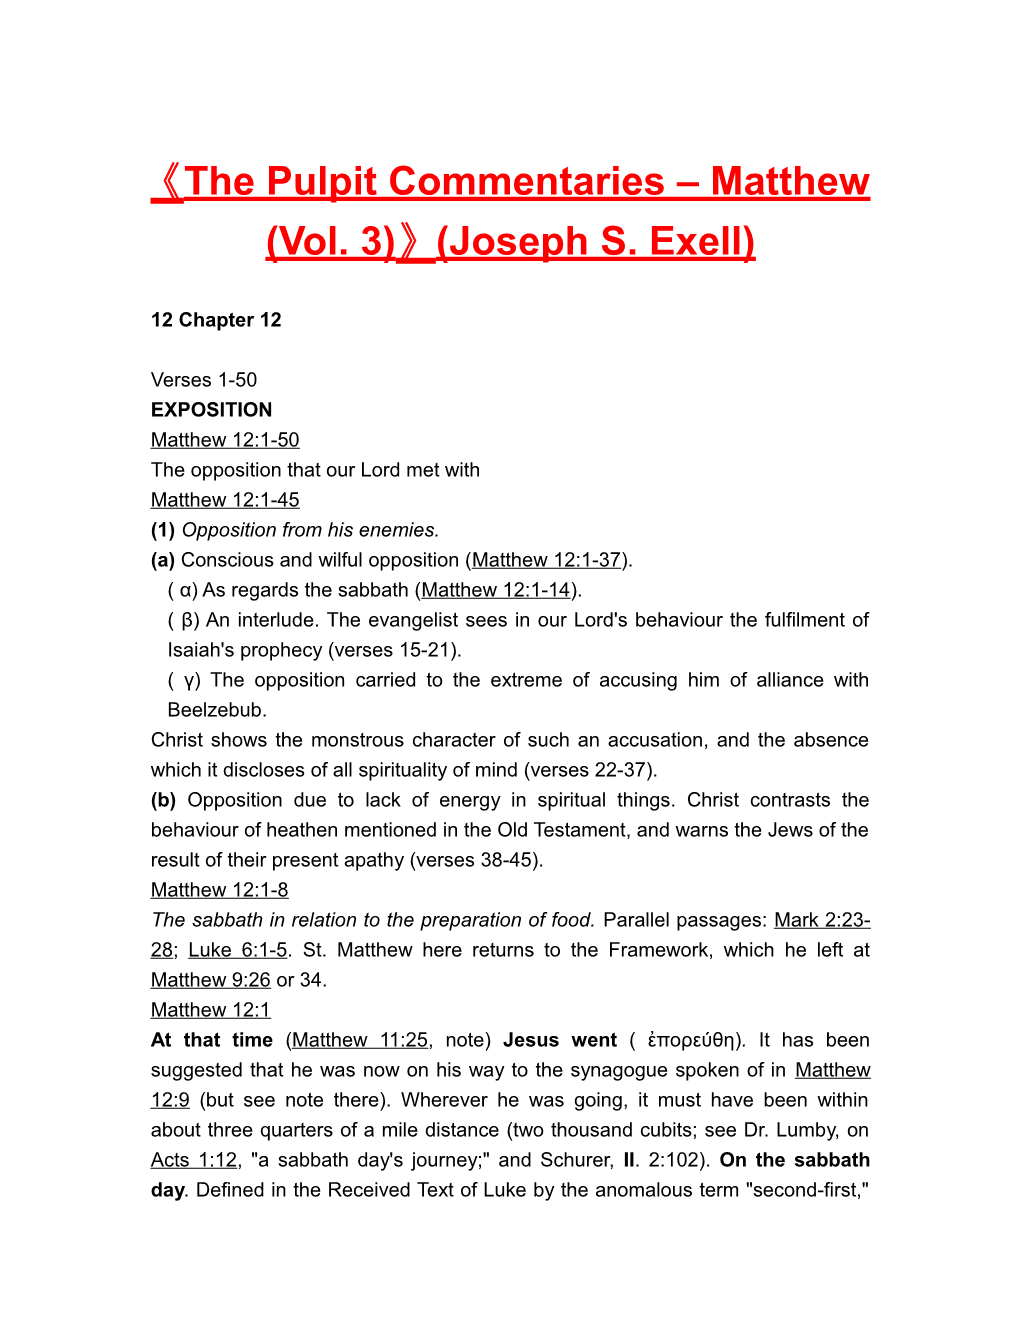 The Pulpit Commentaries Matthew (Vol. 3) (Joseph S. Exell)